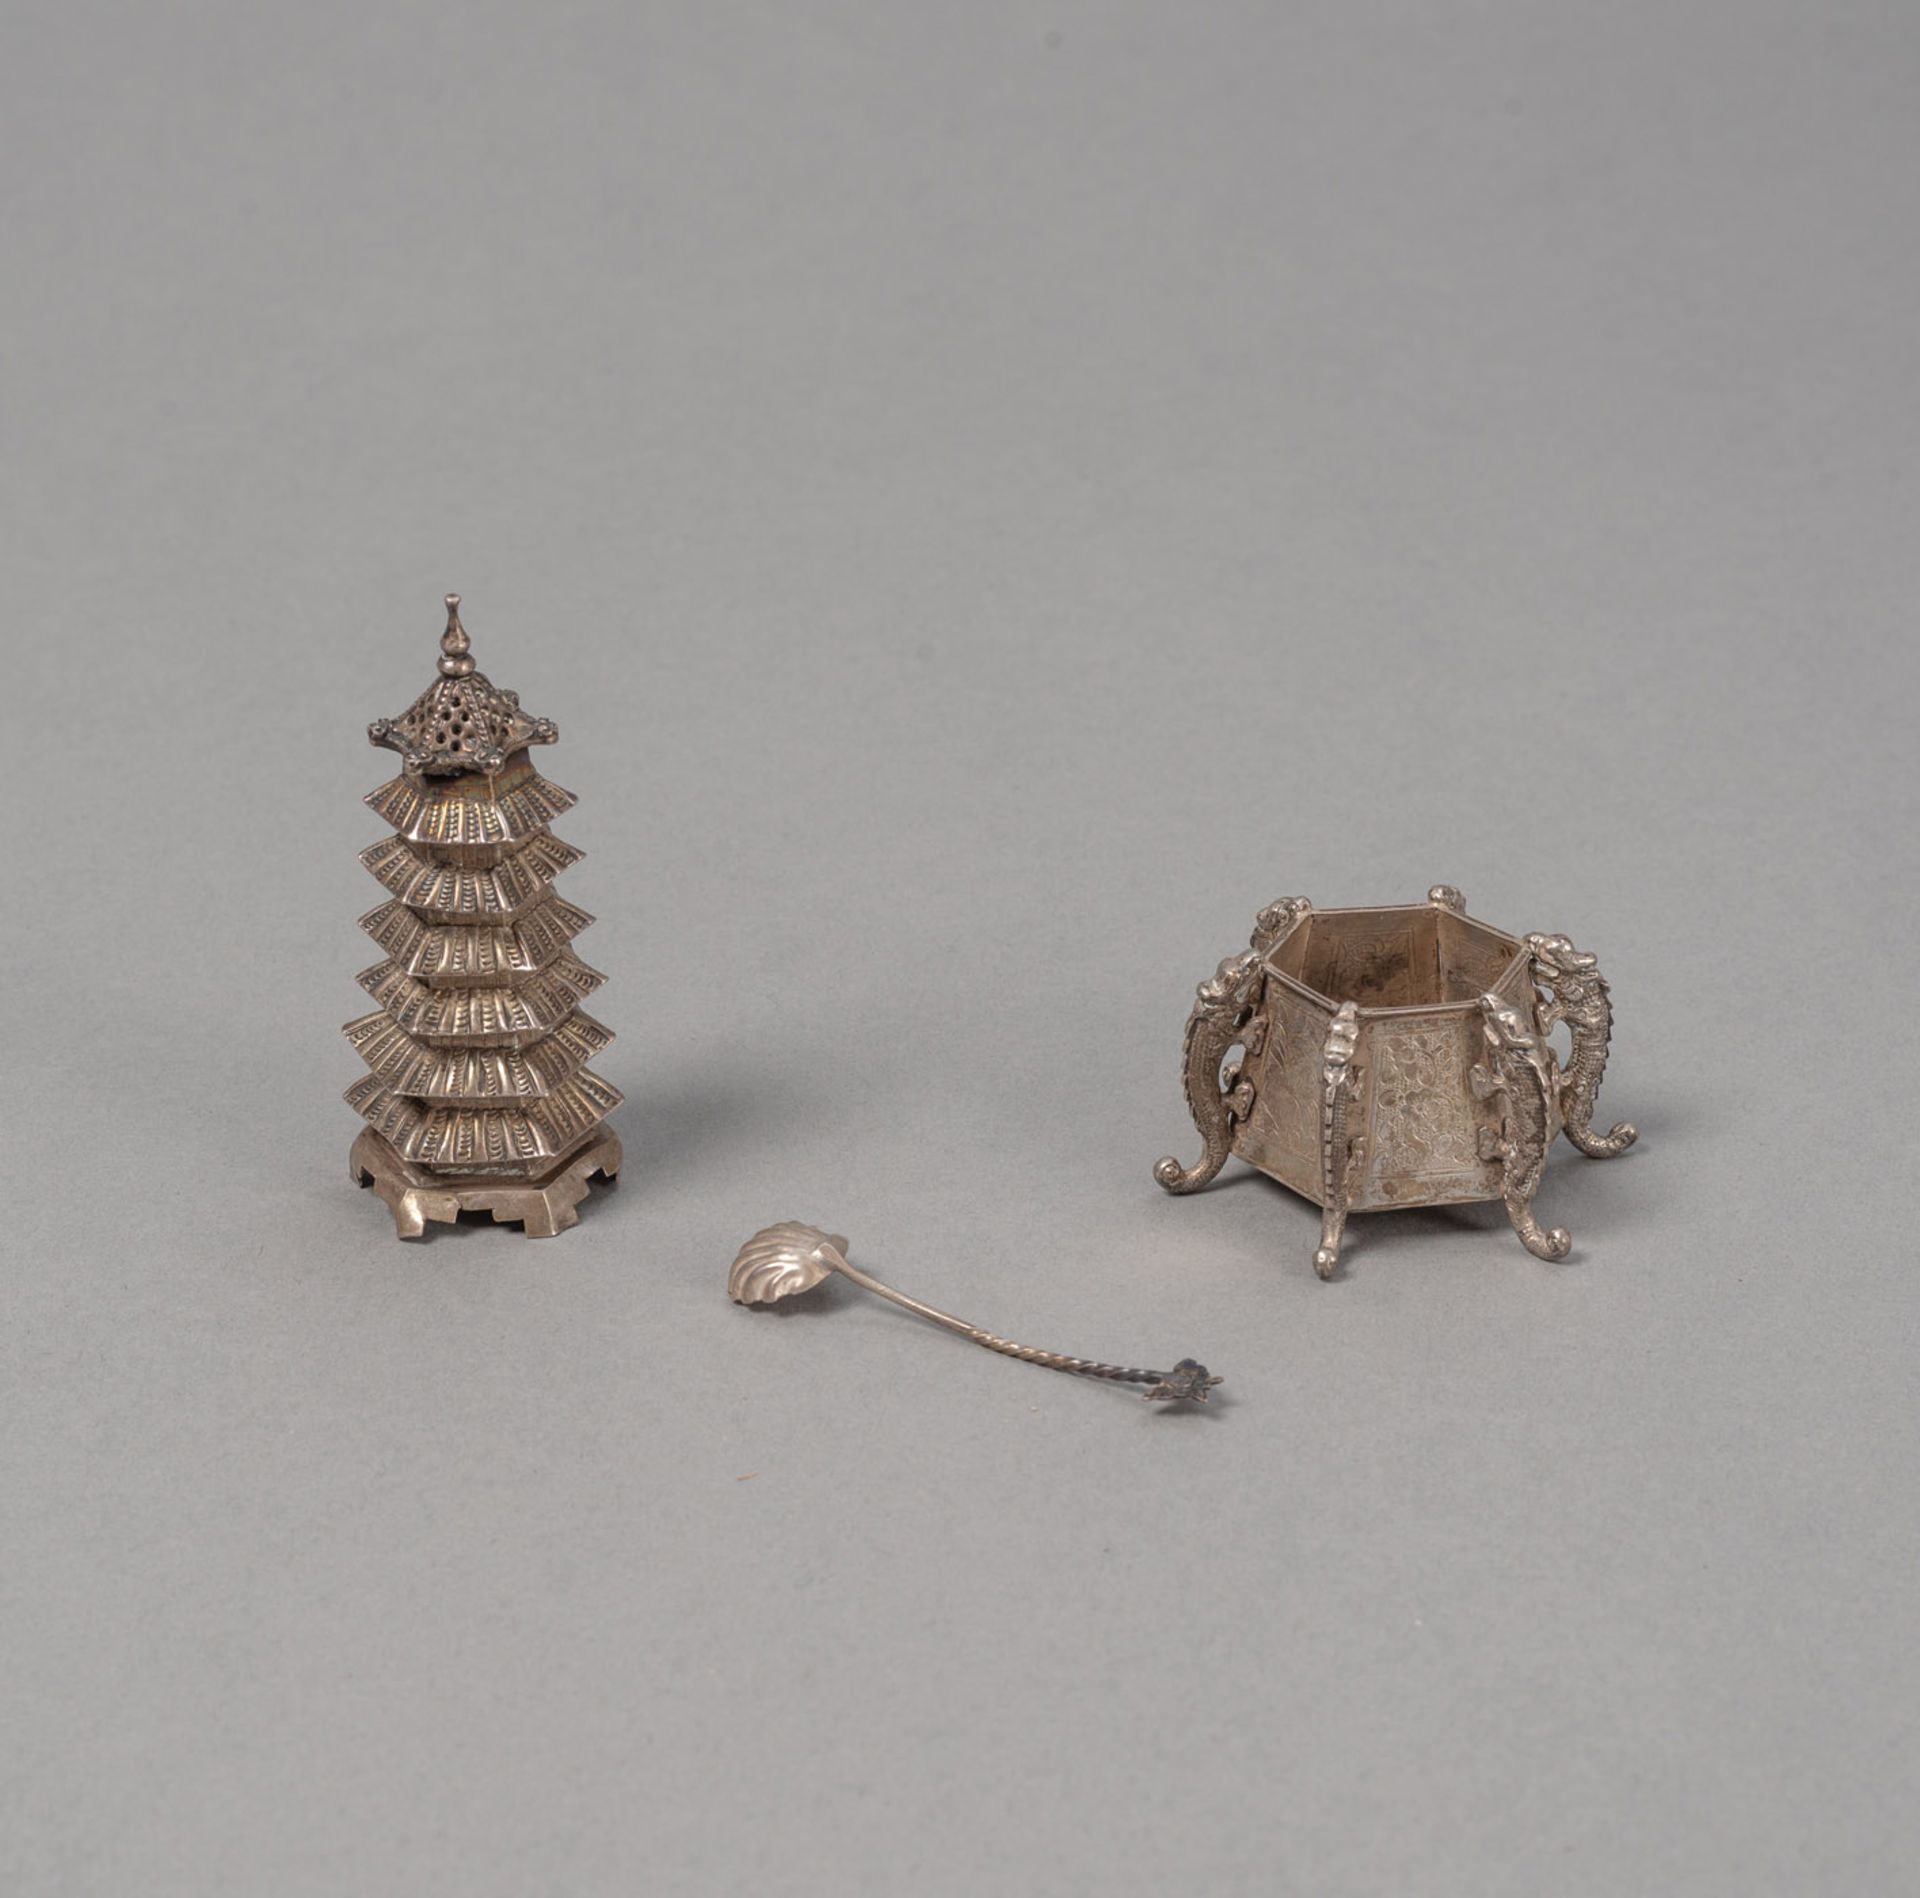 A SILVER SALT SHAKER IN THE SHAPE OF A PAGODA WITH COVER AND A SMALL BOWL WITH A SPOON - Image 2 of 3